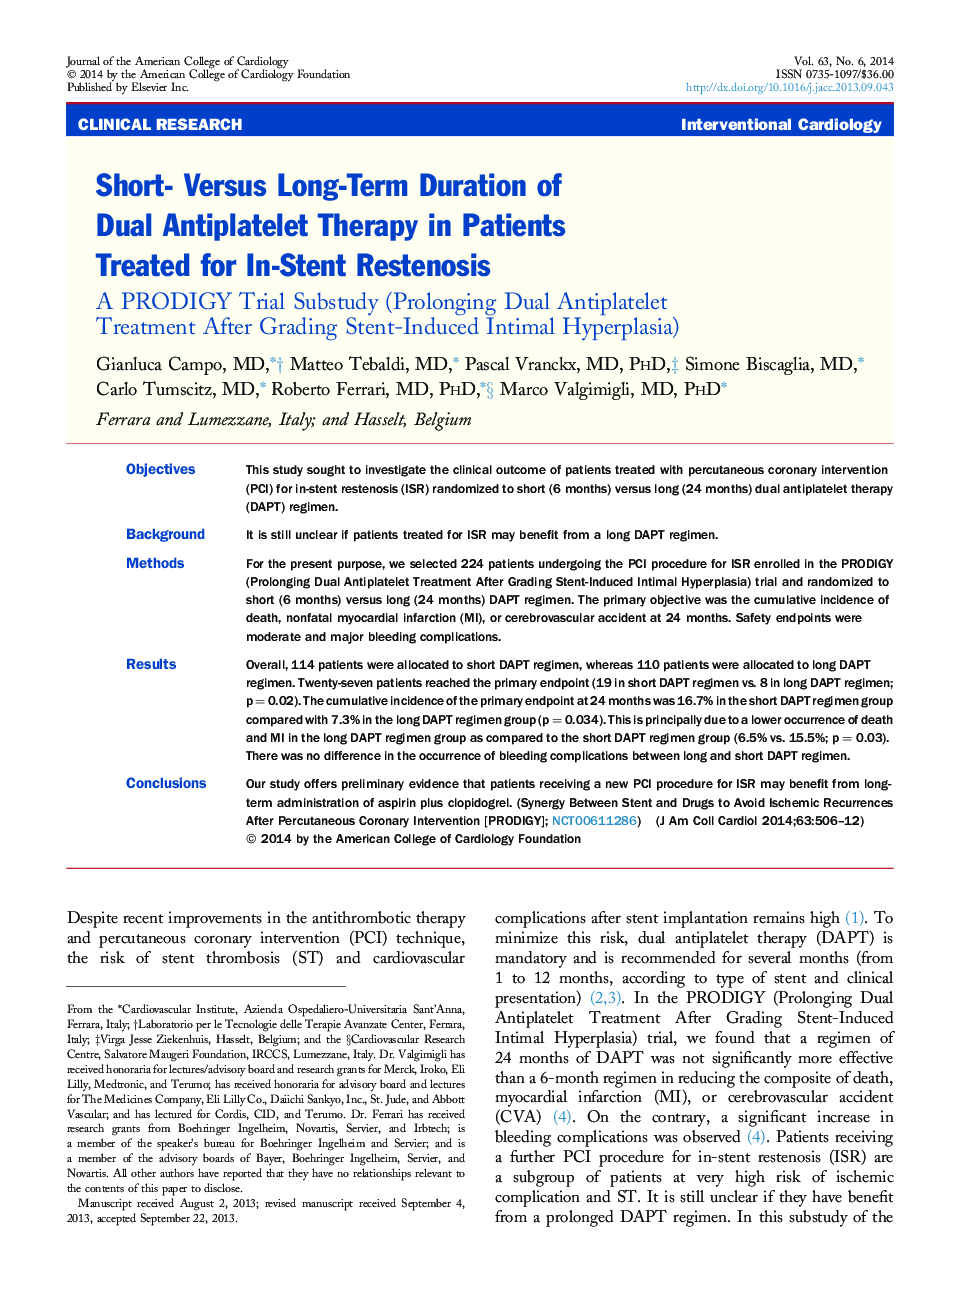 Short- Versus Long-Term Duration of Dual Antiplatelet Therapy in Patients Treated for In-Stent Restenosis : A PRODIGY Trial Substudy (Prolonging Dual Antiplatelet Treatment After Grading Stent-Induced Intimal Hyperplasia)